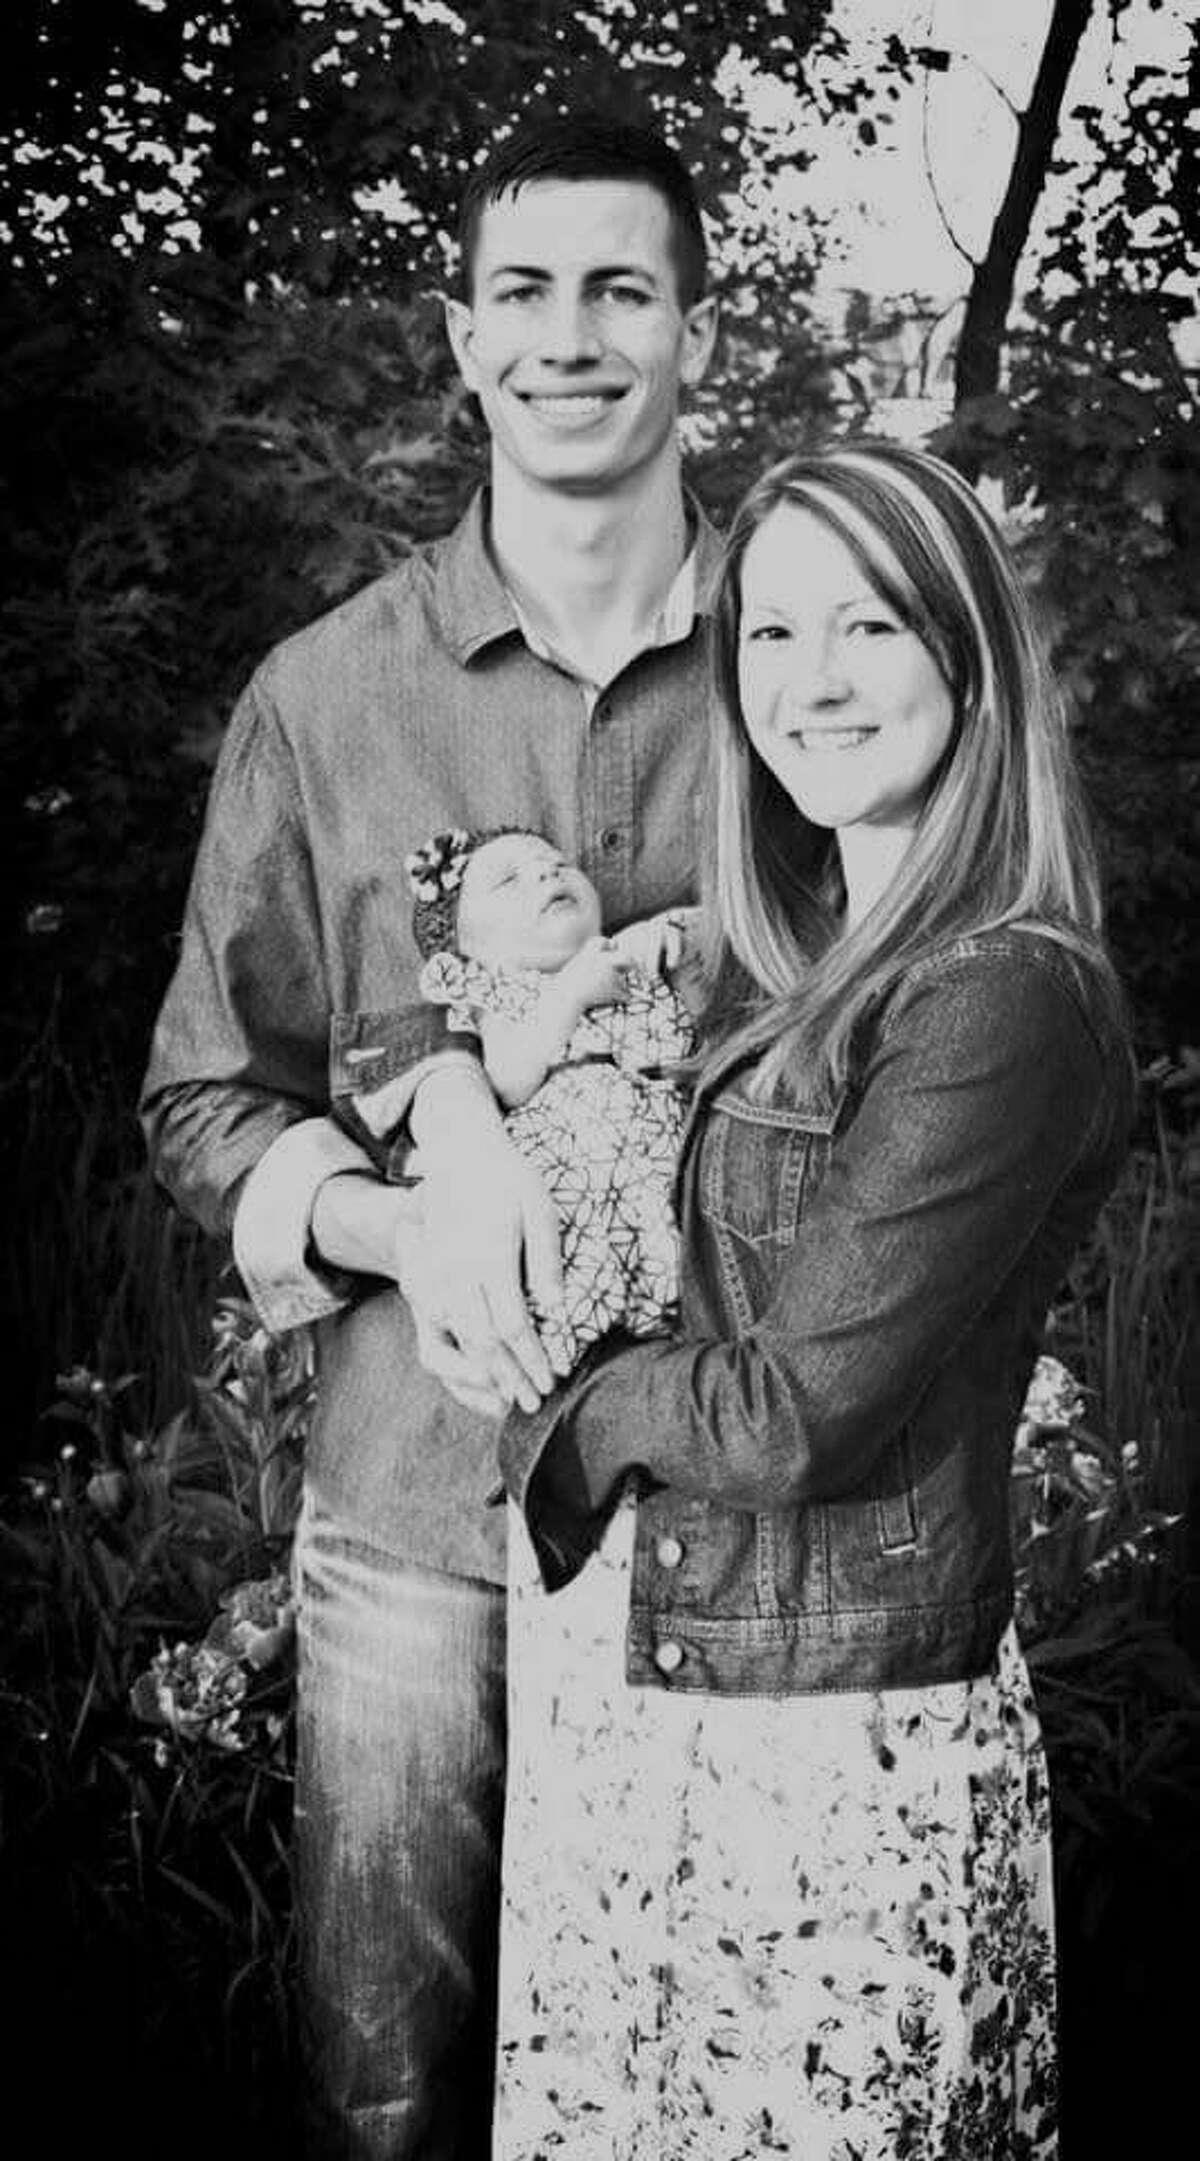 Dr. Ryan Balzer is opening ADIO Chiropractic at 301 E. Wackerly St. in the Bell Plaza. Balzer is shown with his wife, Elizabeth, and their newborn daughter, Olivia. The practice will treat the entire family.